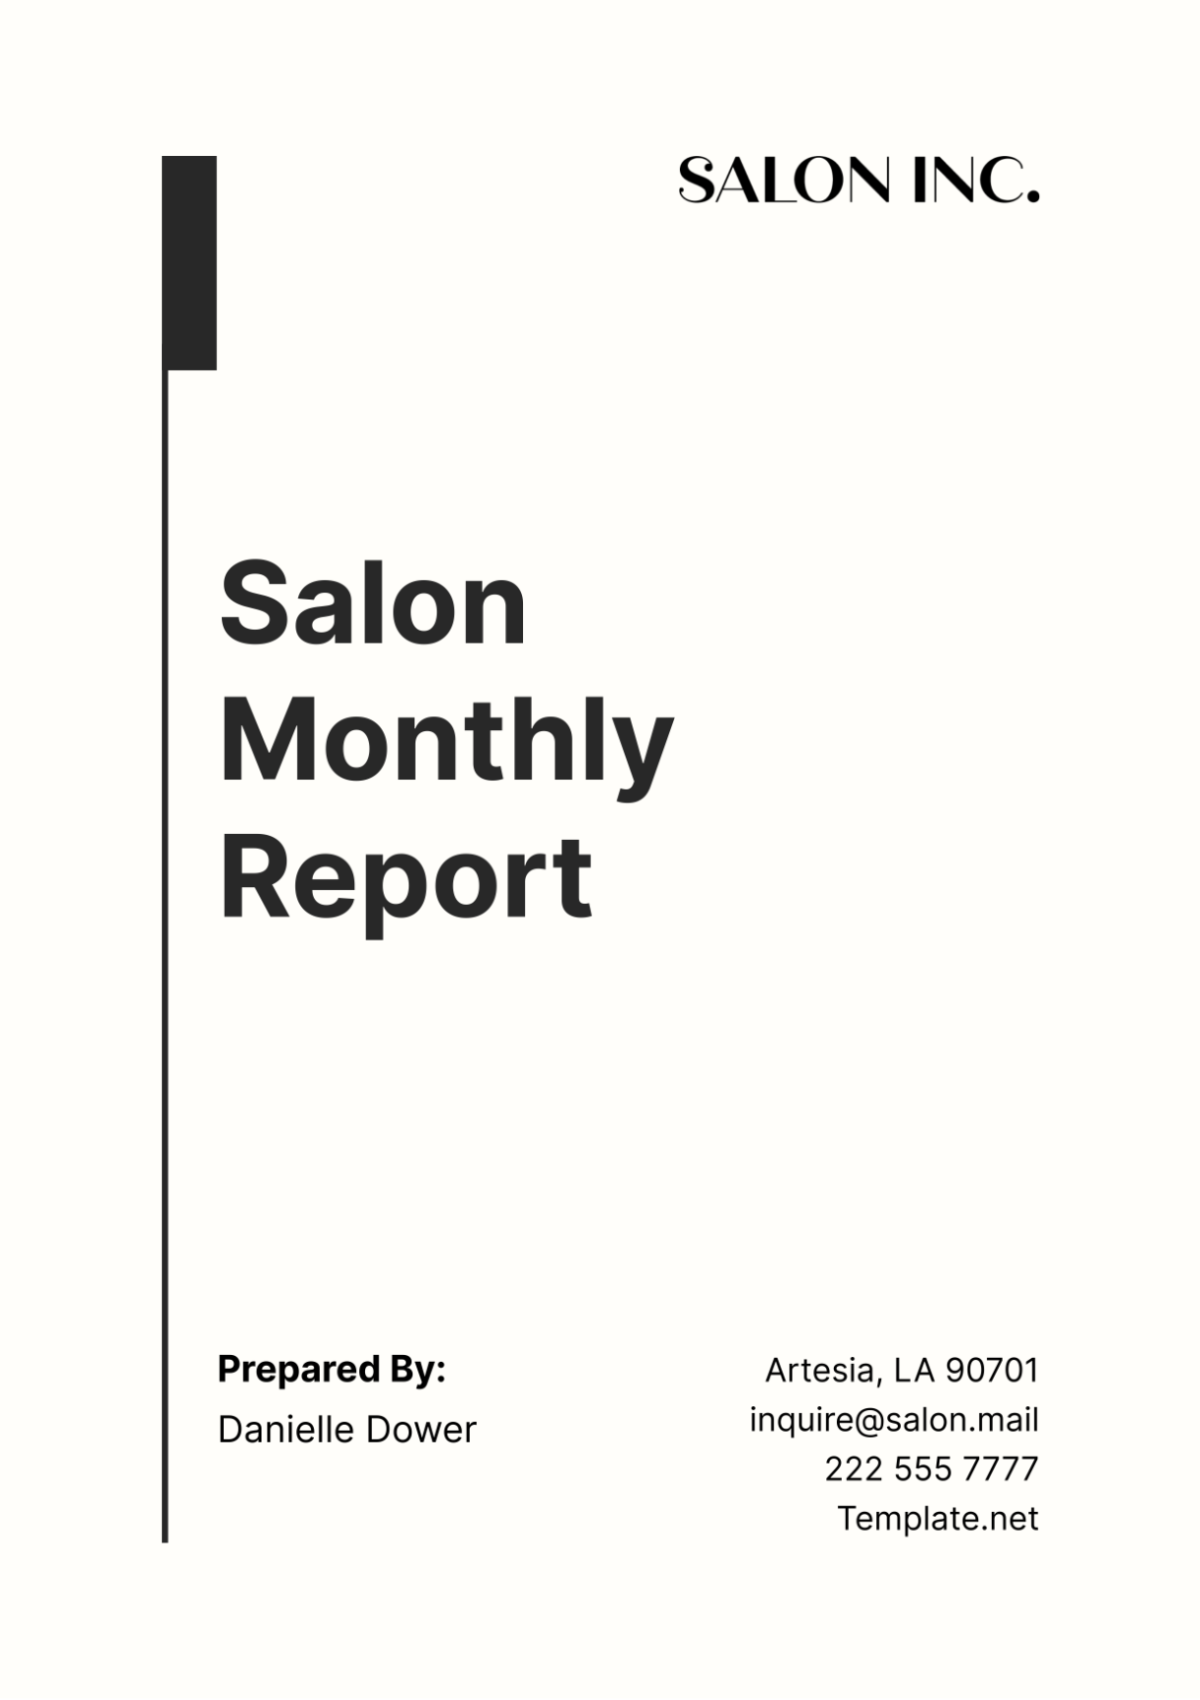 Salon Monthly Report Template